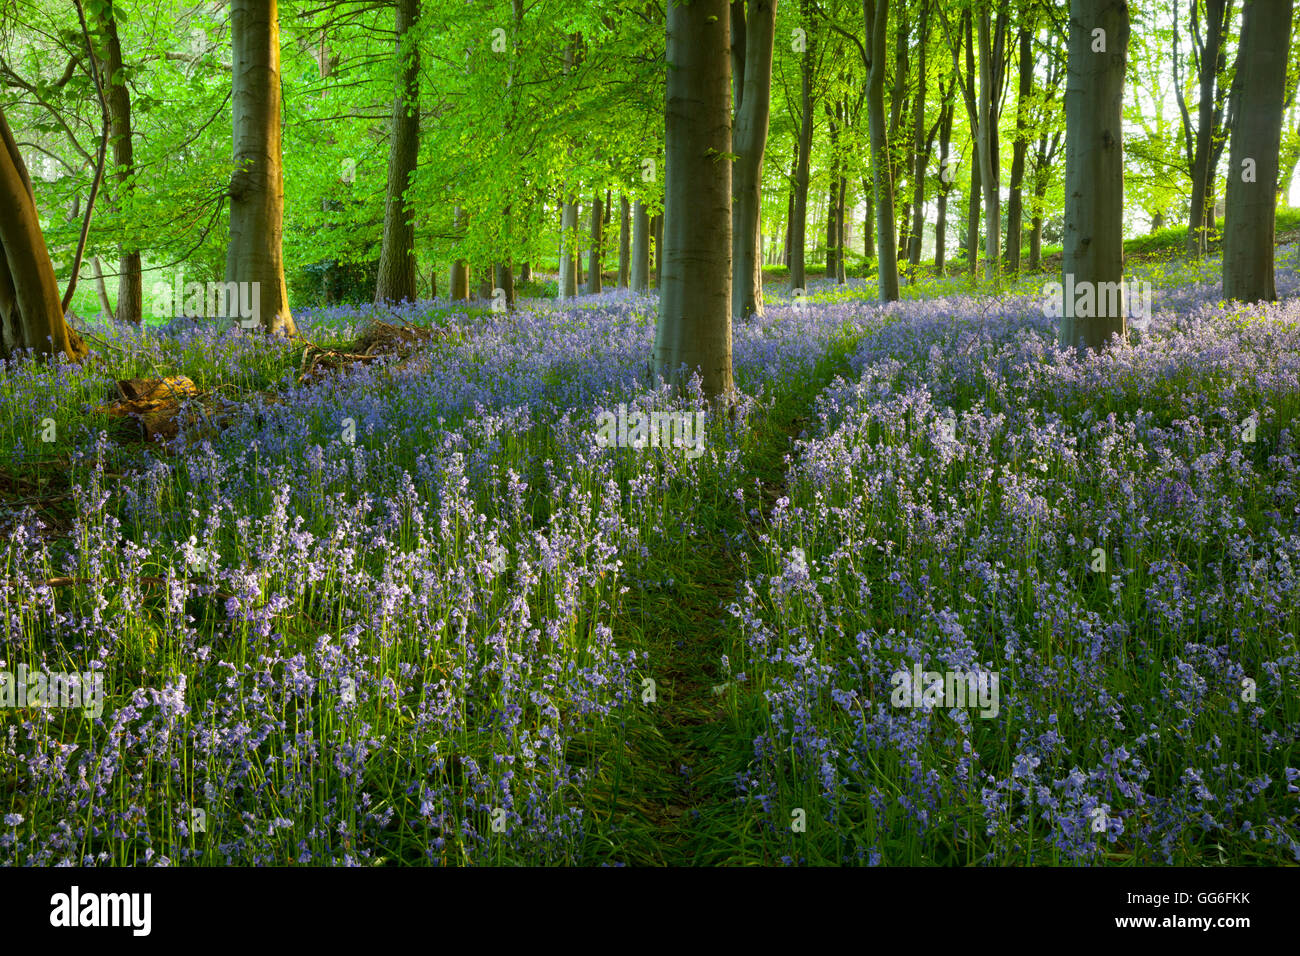 Chemin à travers bois bluebell, Chipping Campden, Cotswolds, Gloucestershire, Angleterre, Royaume-Uni, Europe Banque D'Images